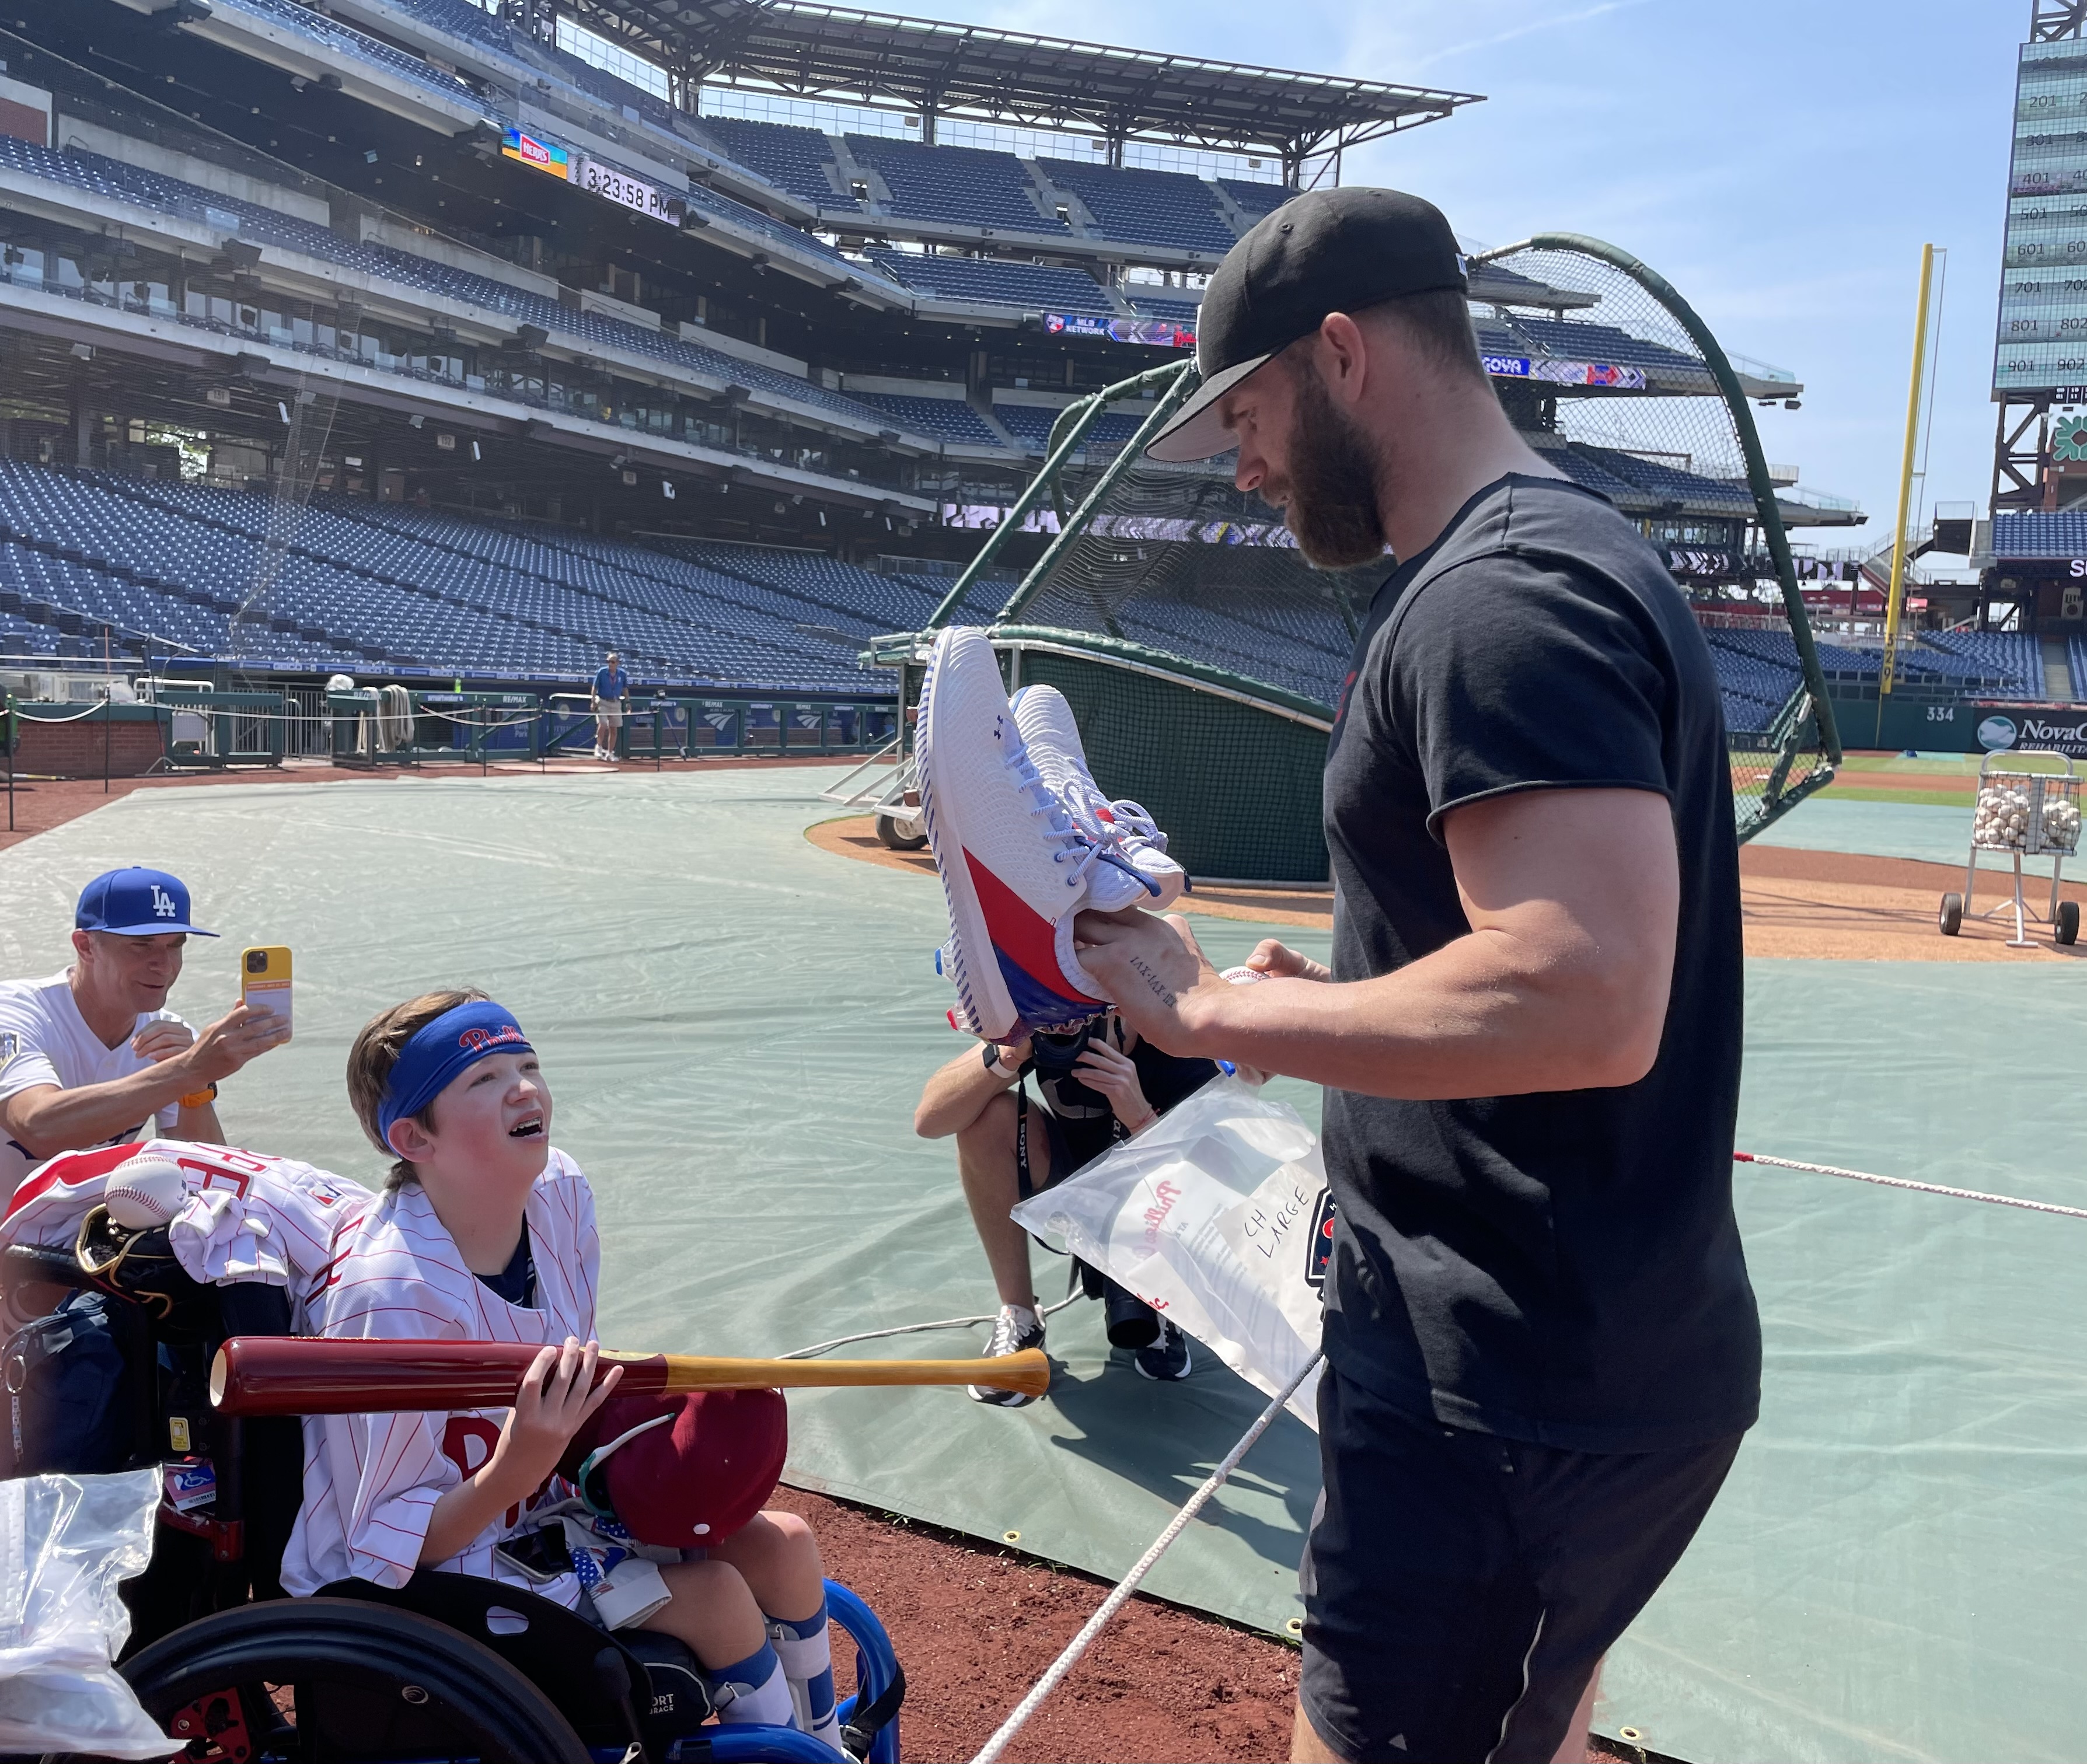 Phillies star Bryce Harper helps reunite young fan with family